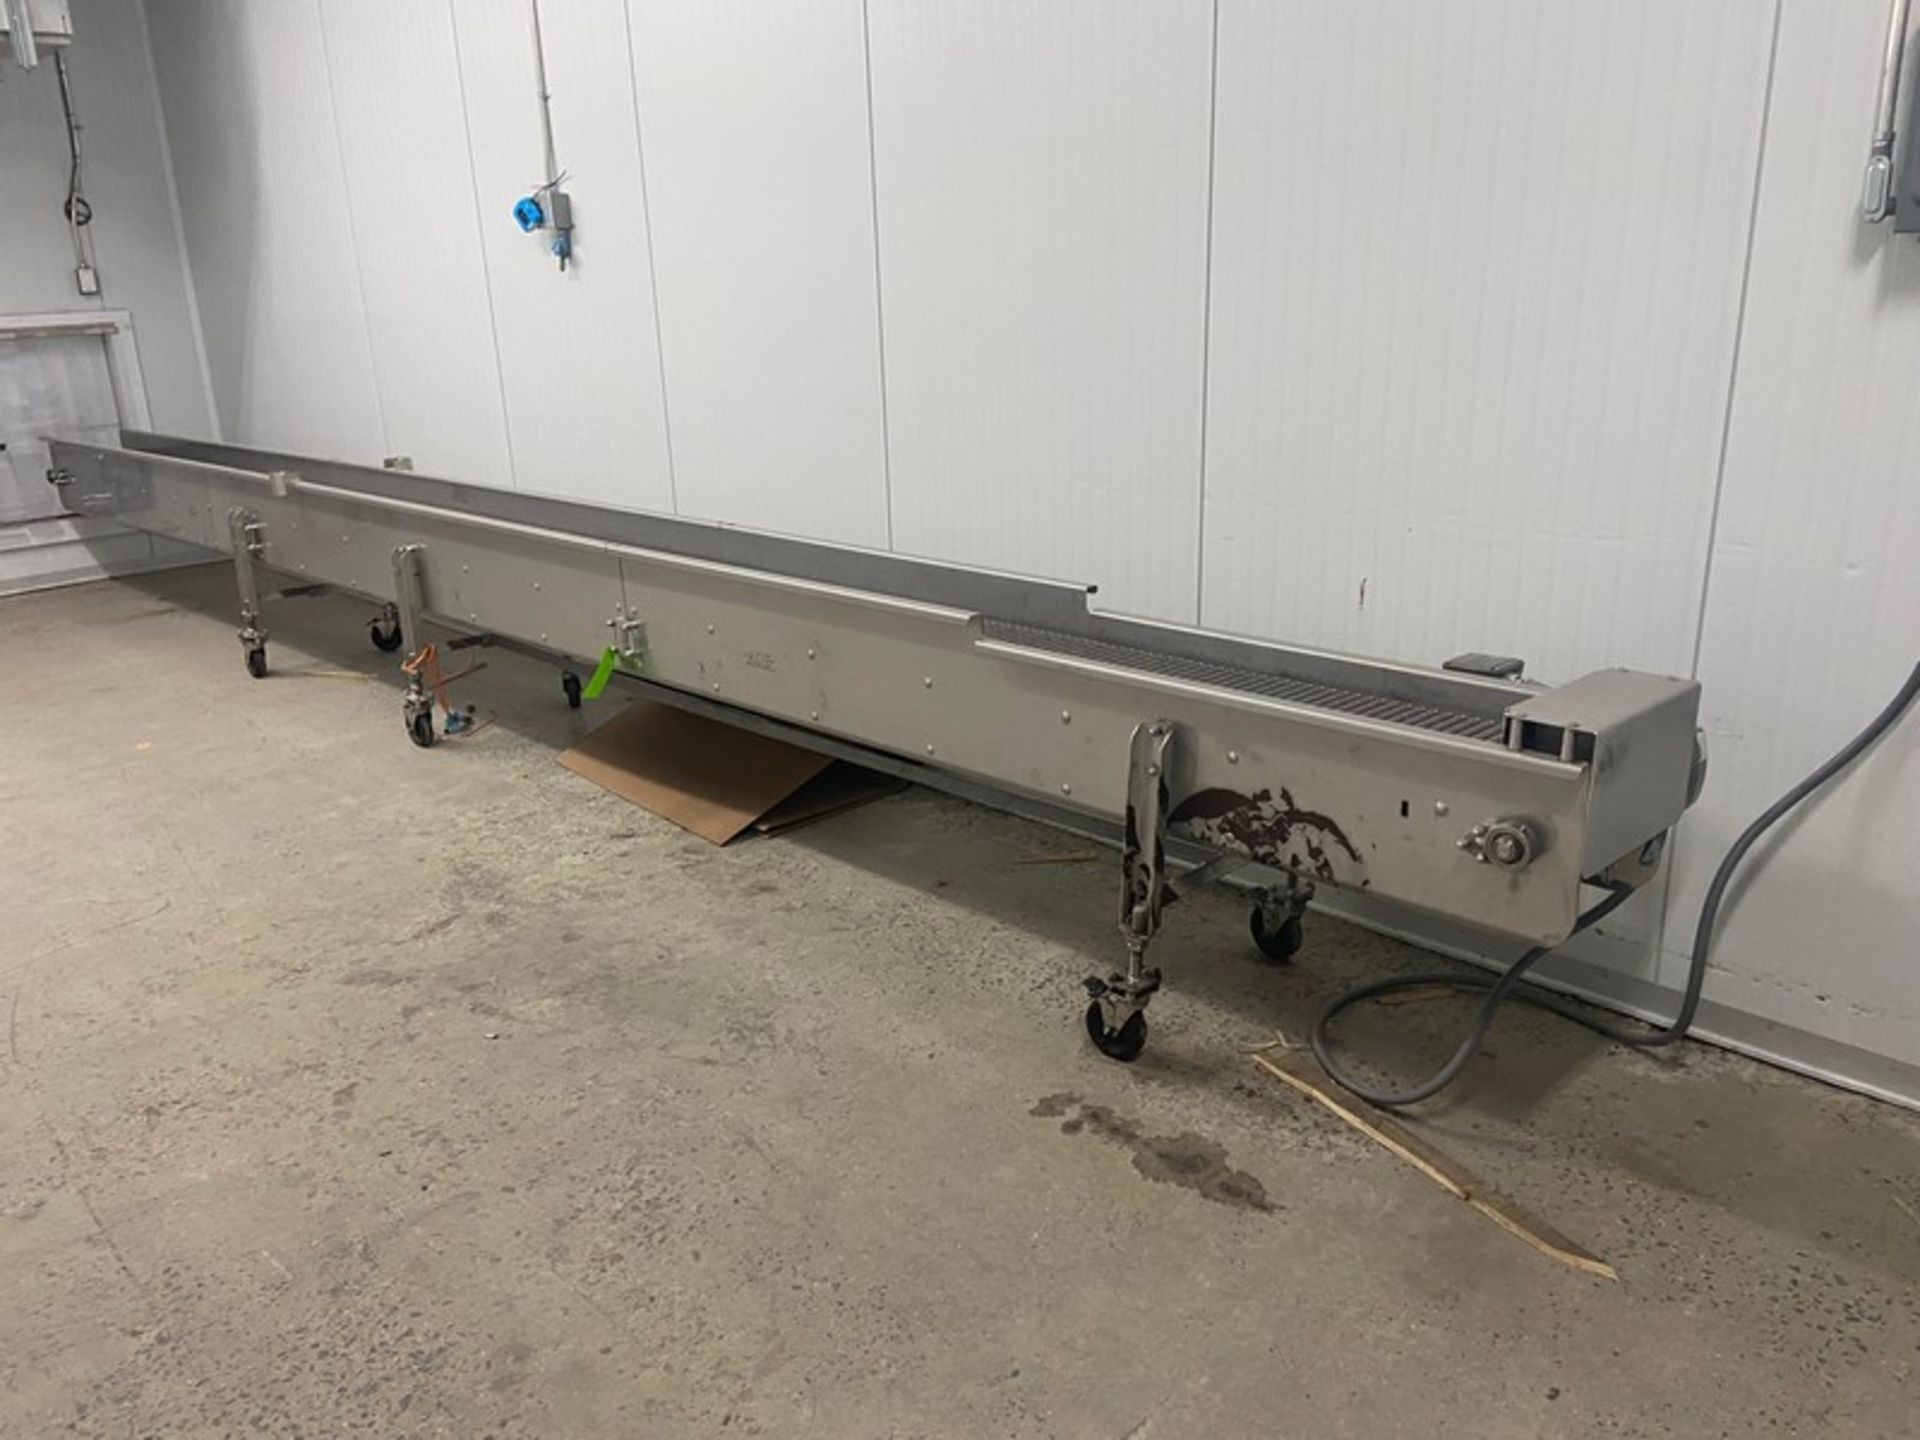 Straight Section of Roller Conveyor, Aprox. 290" L, with SEW Drive, with Square D Safety Switch,